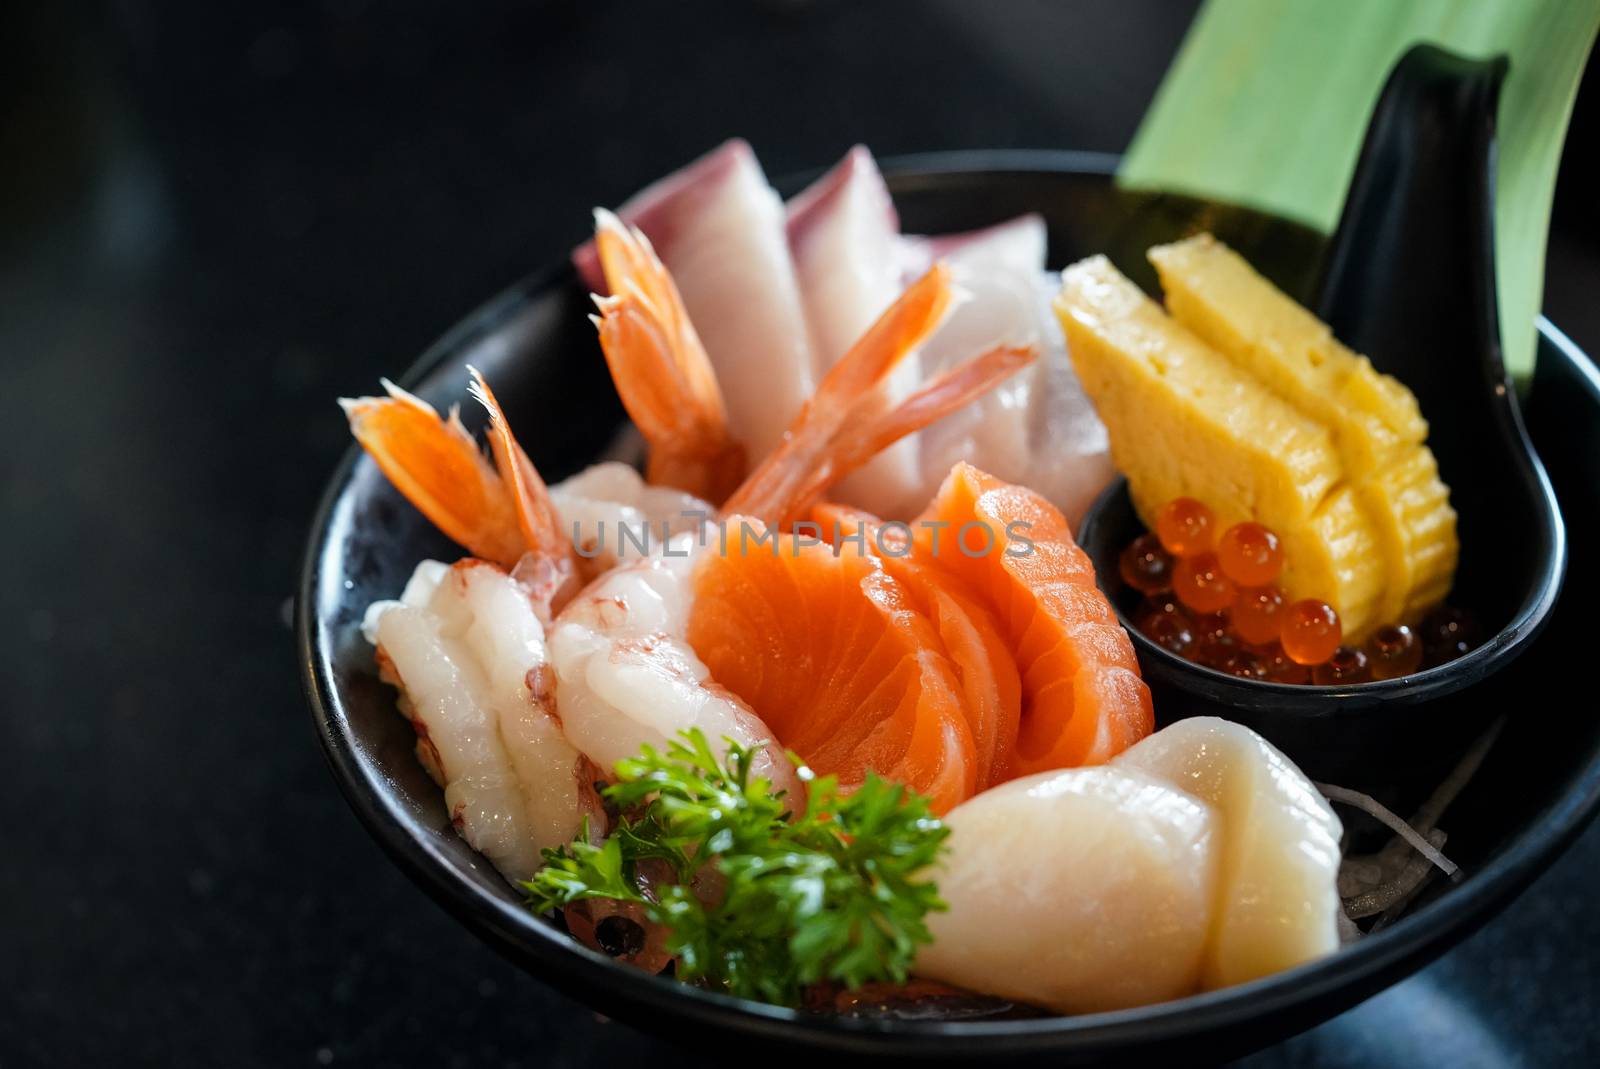 The sashimi set is beautifully arranged in a black plate by chadchai_k